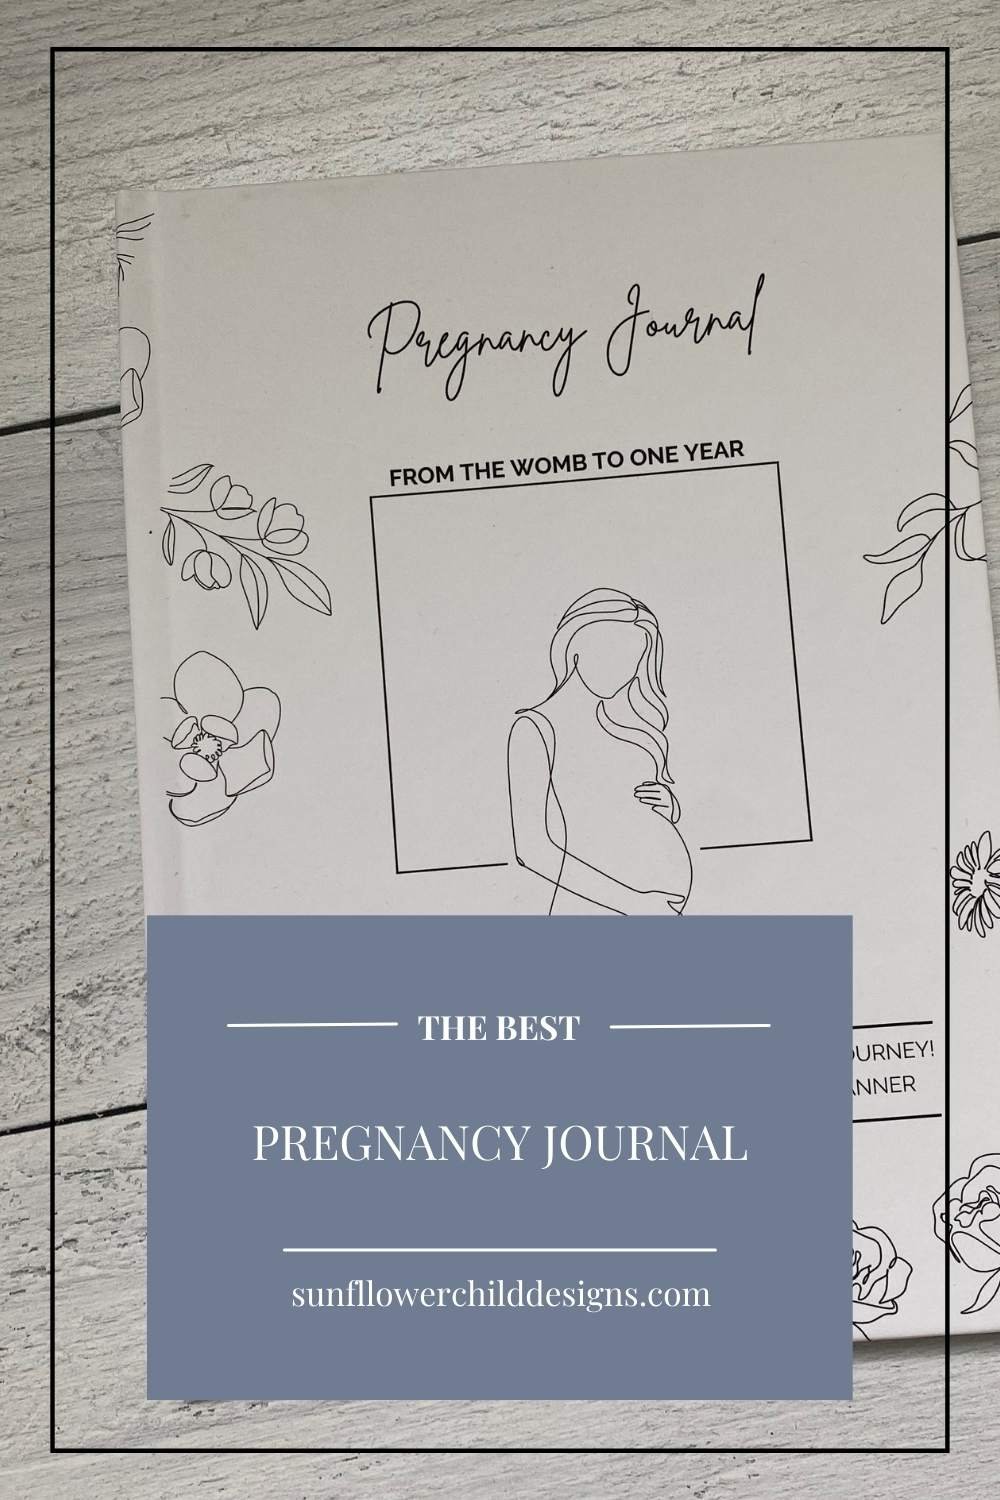 Is Simplicity The Key to Best Pregnancy Journals?